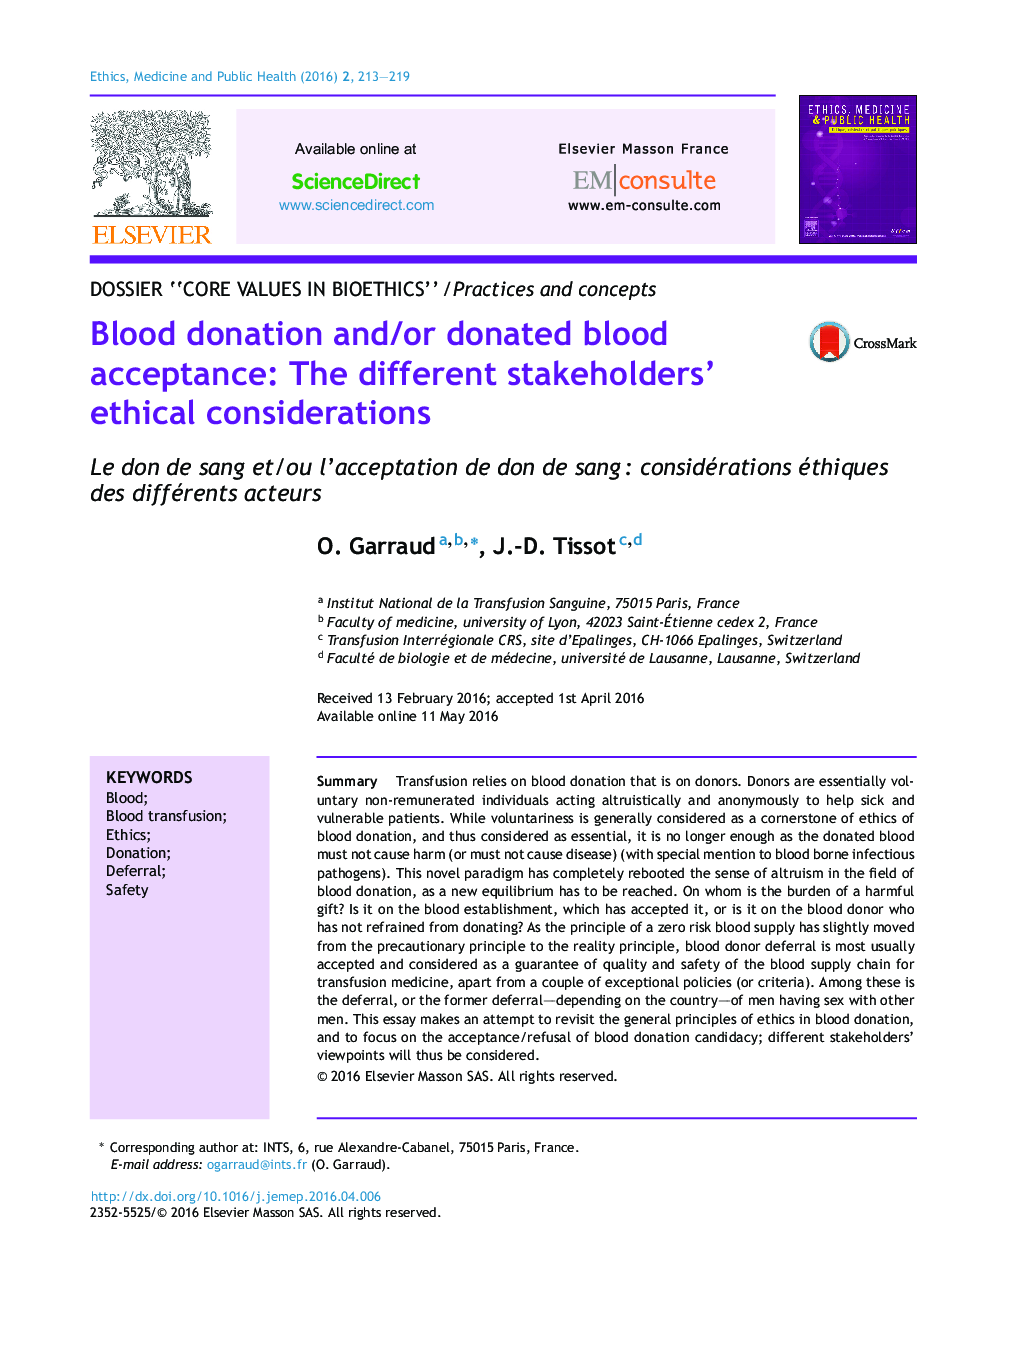 Blood donation and/or donated blood acceptance: The different stakeholders’ ethical considerations